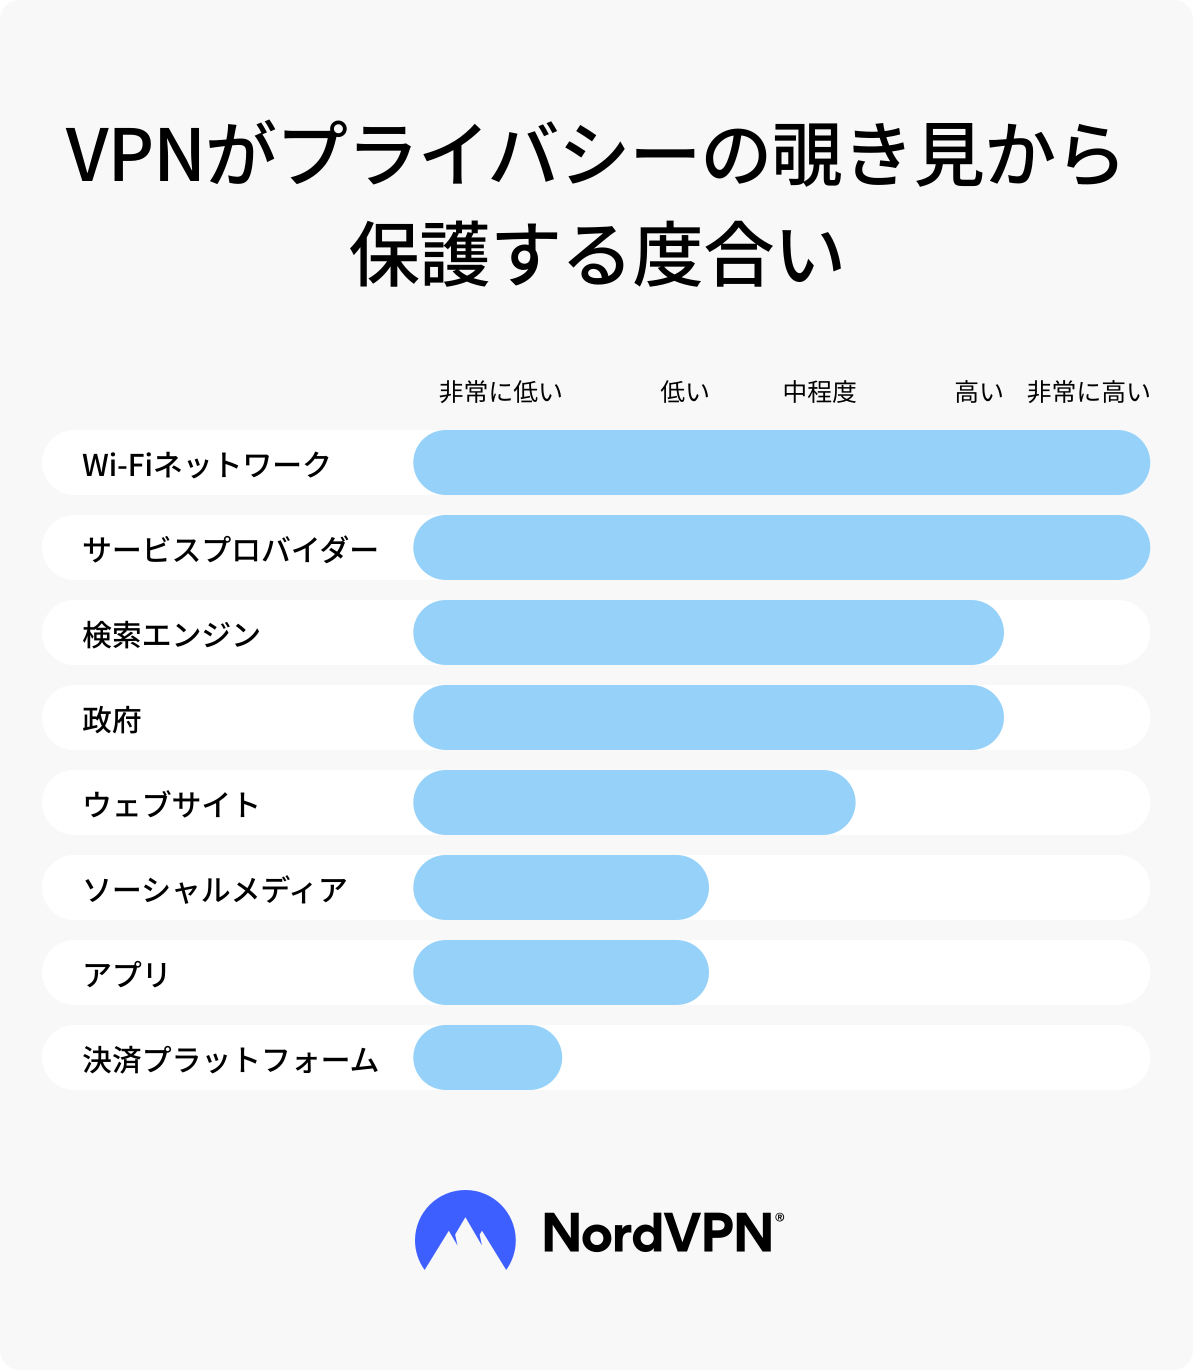 Does an anonymous VPN exist